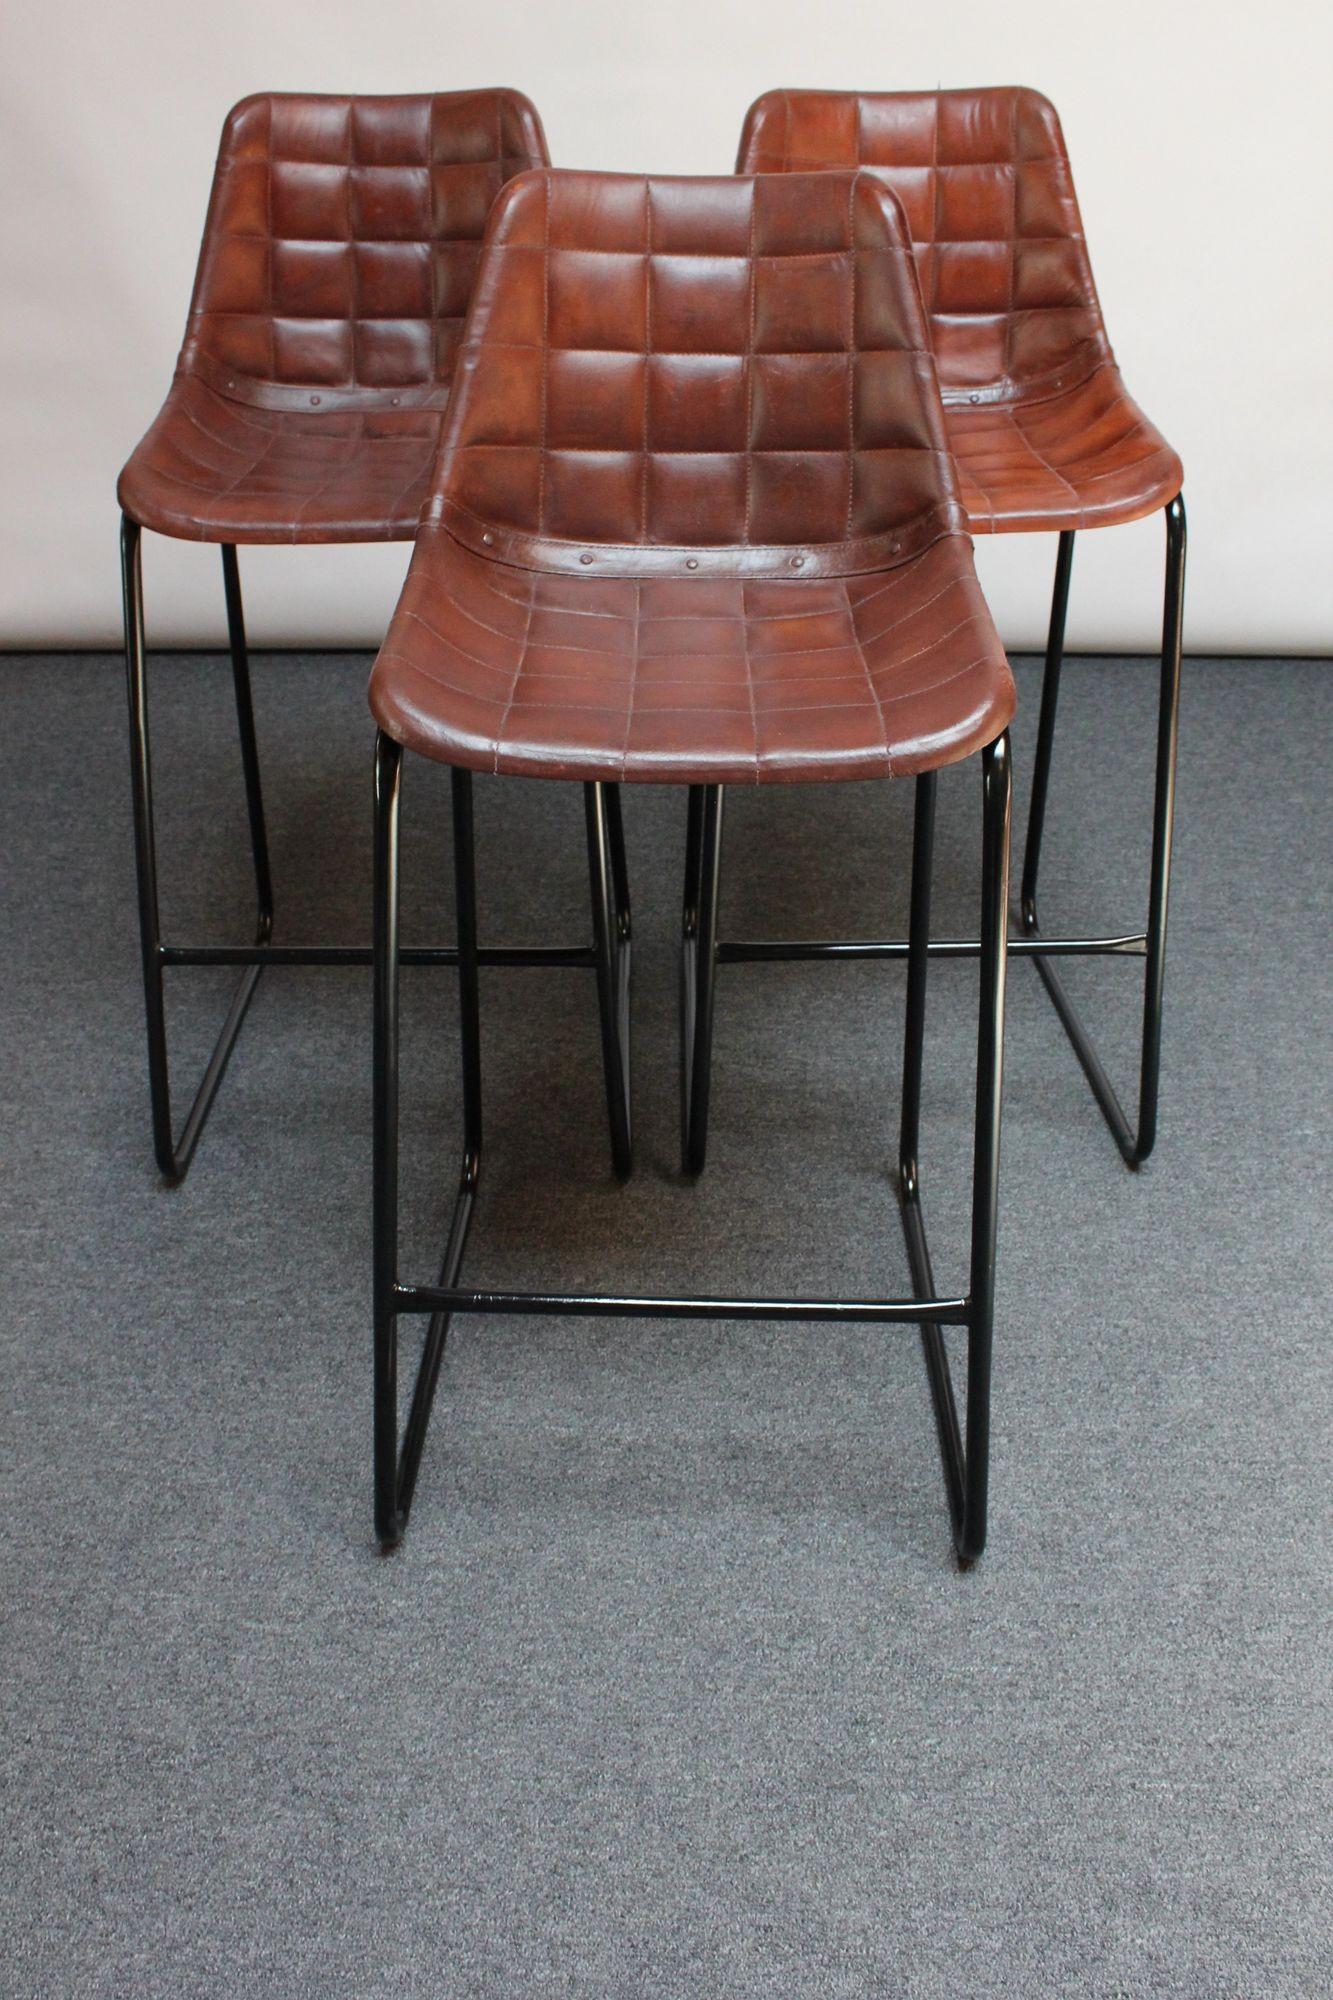 Set of Three Vintage Italian Steel and Iron Barstools with Leatherette Seats In Good Condition For Sale In Brooklyn, NY